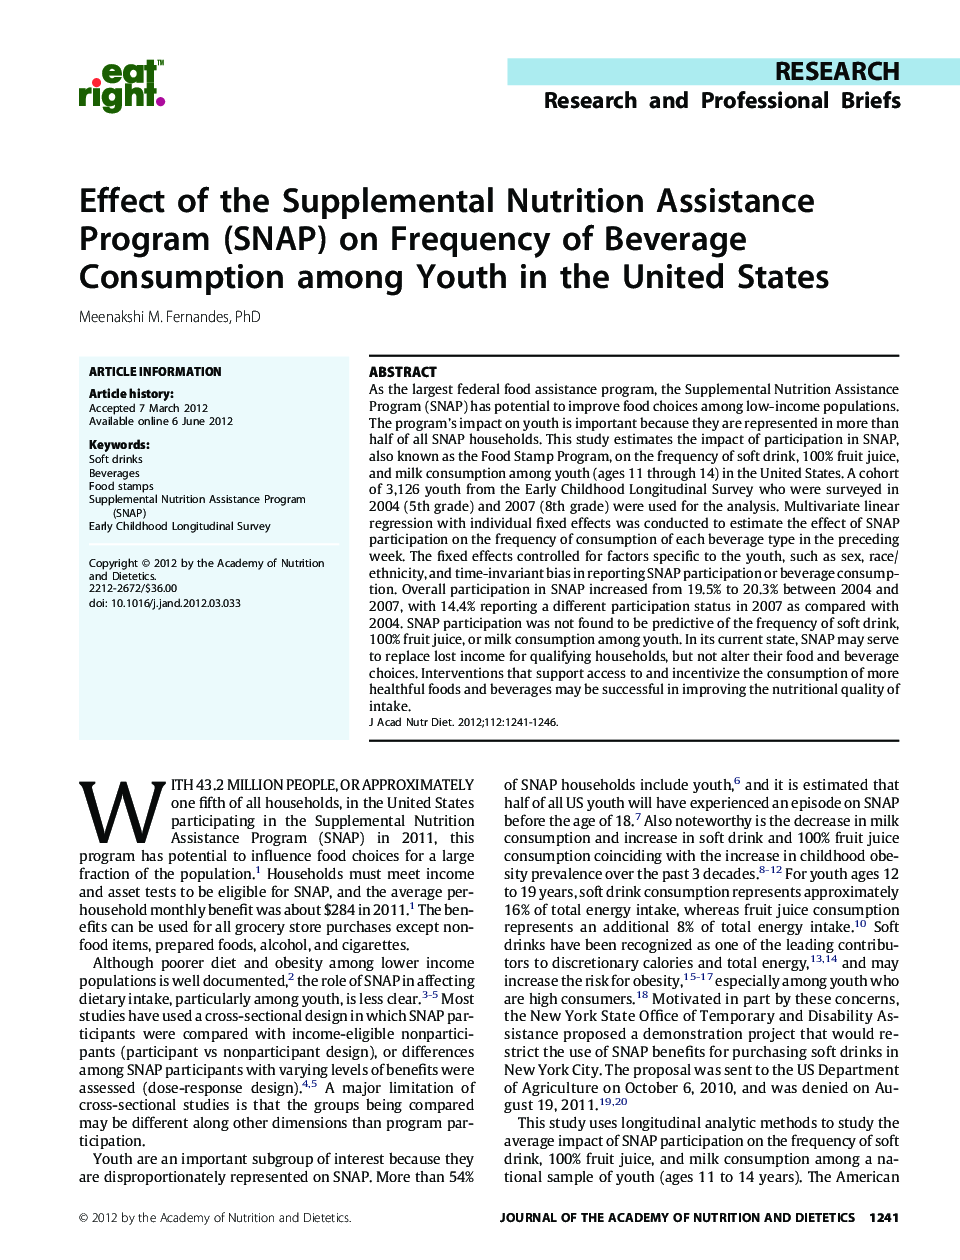 Effect of the Supplemental Nutrition Assistance Program (SNAP) on Frequency of Beverage Consumption among Youth in the United States 